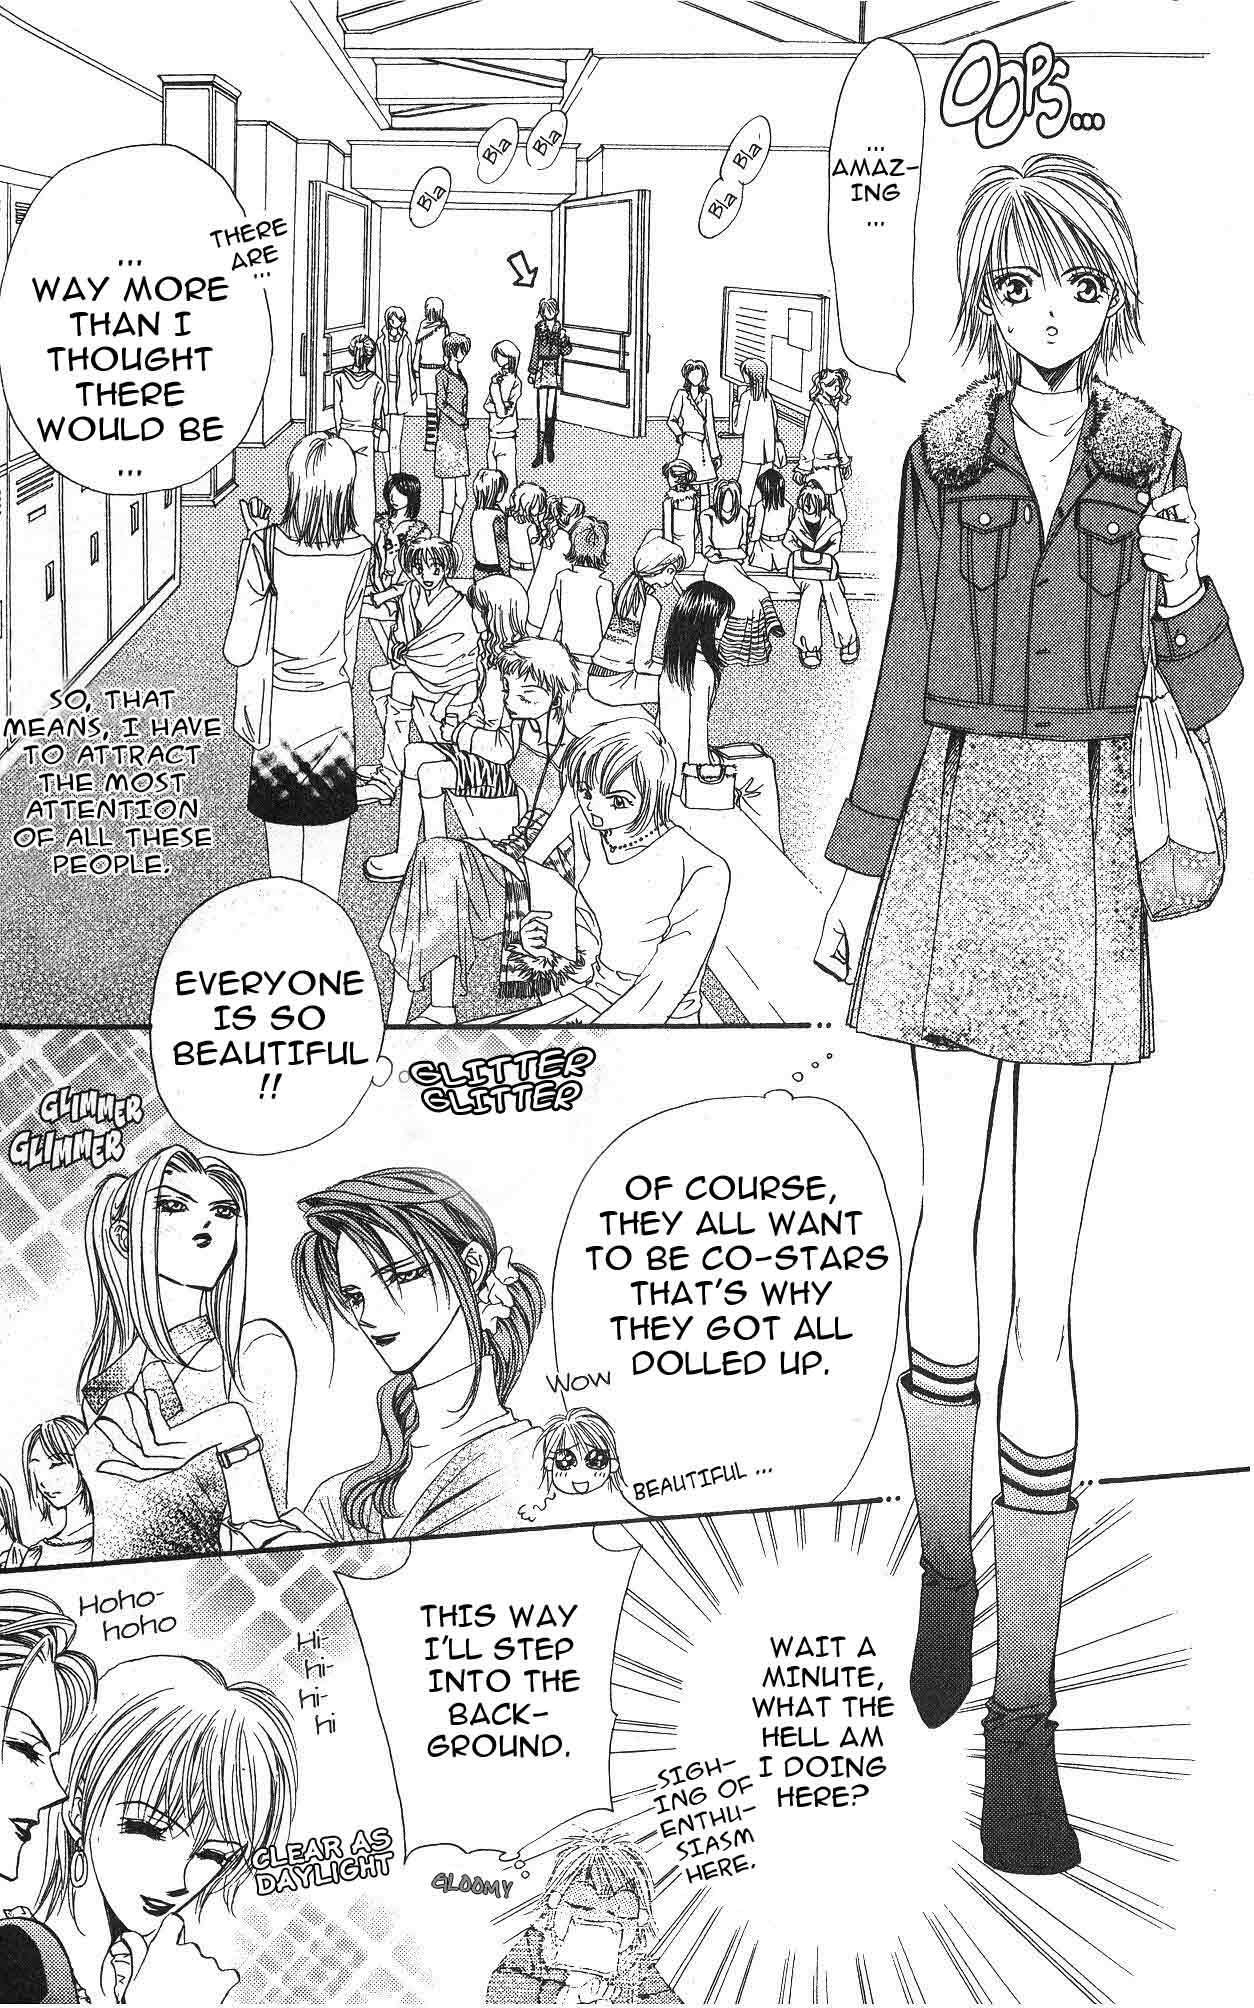 Skip Beat!, Chapter 3 The Feast of Horror, part 1 image 14